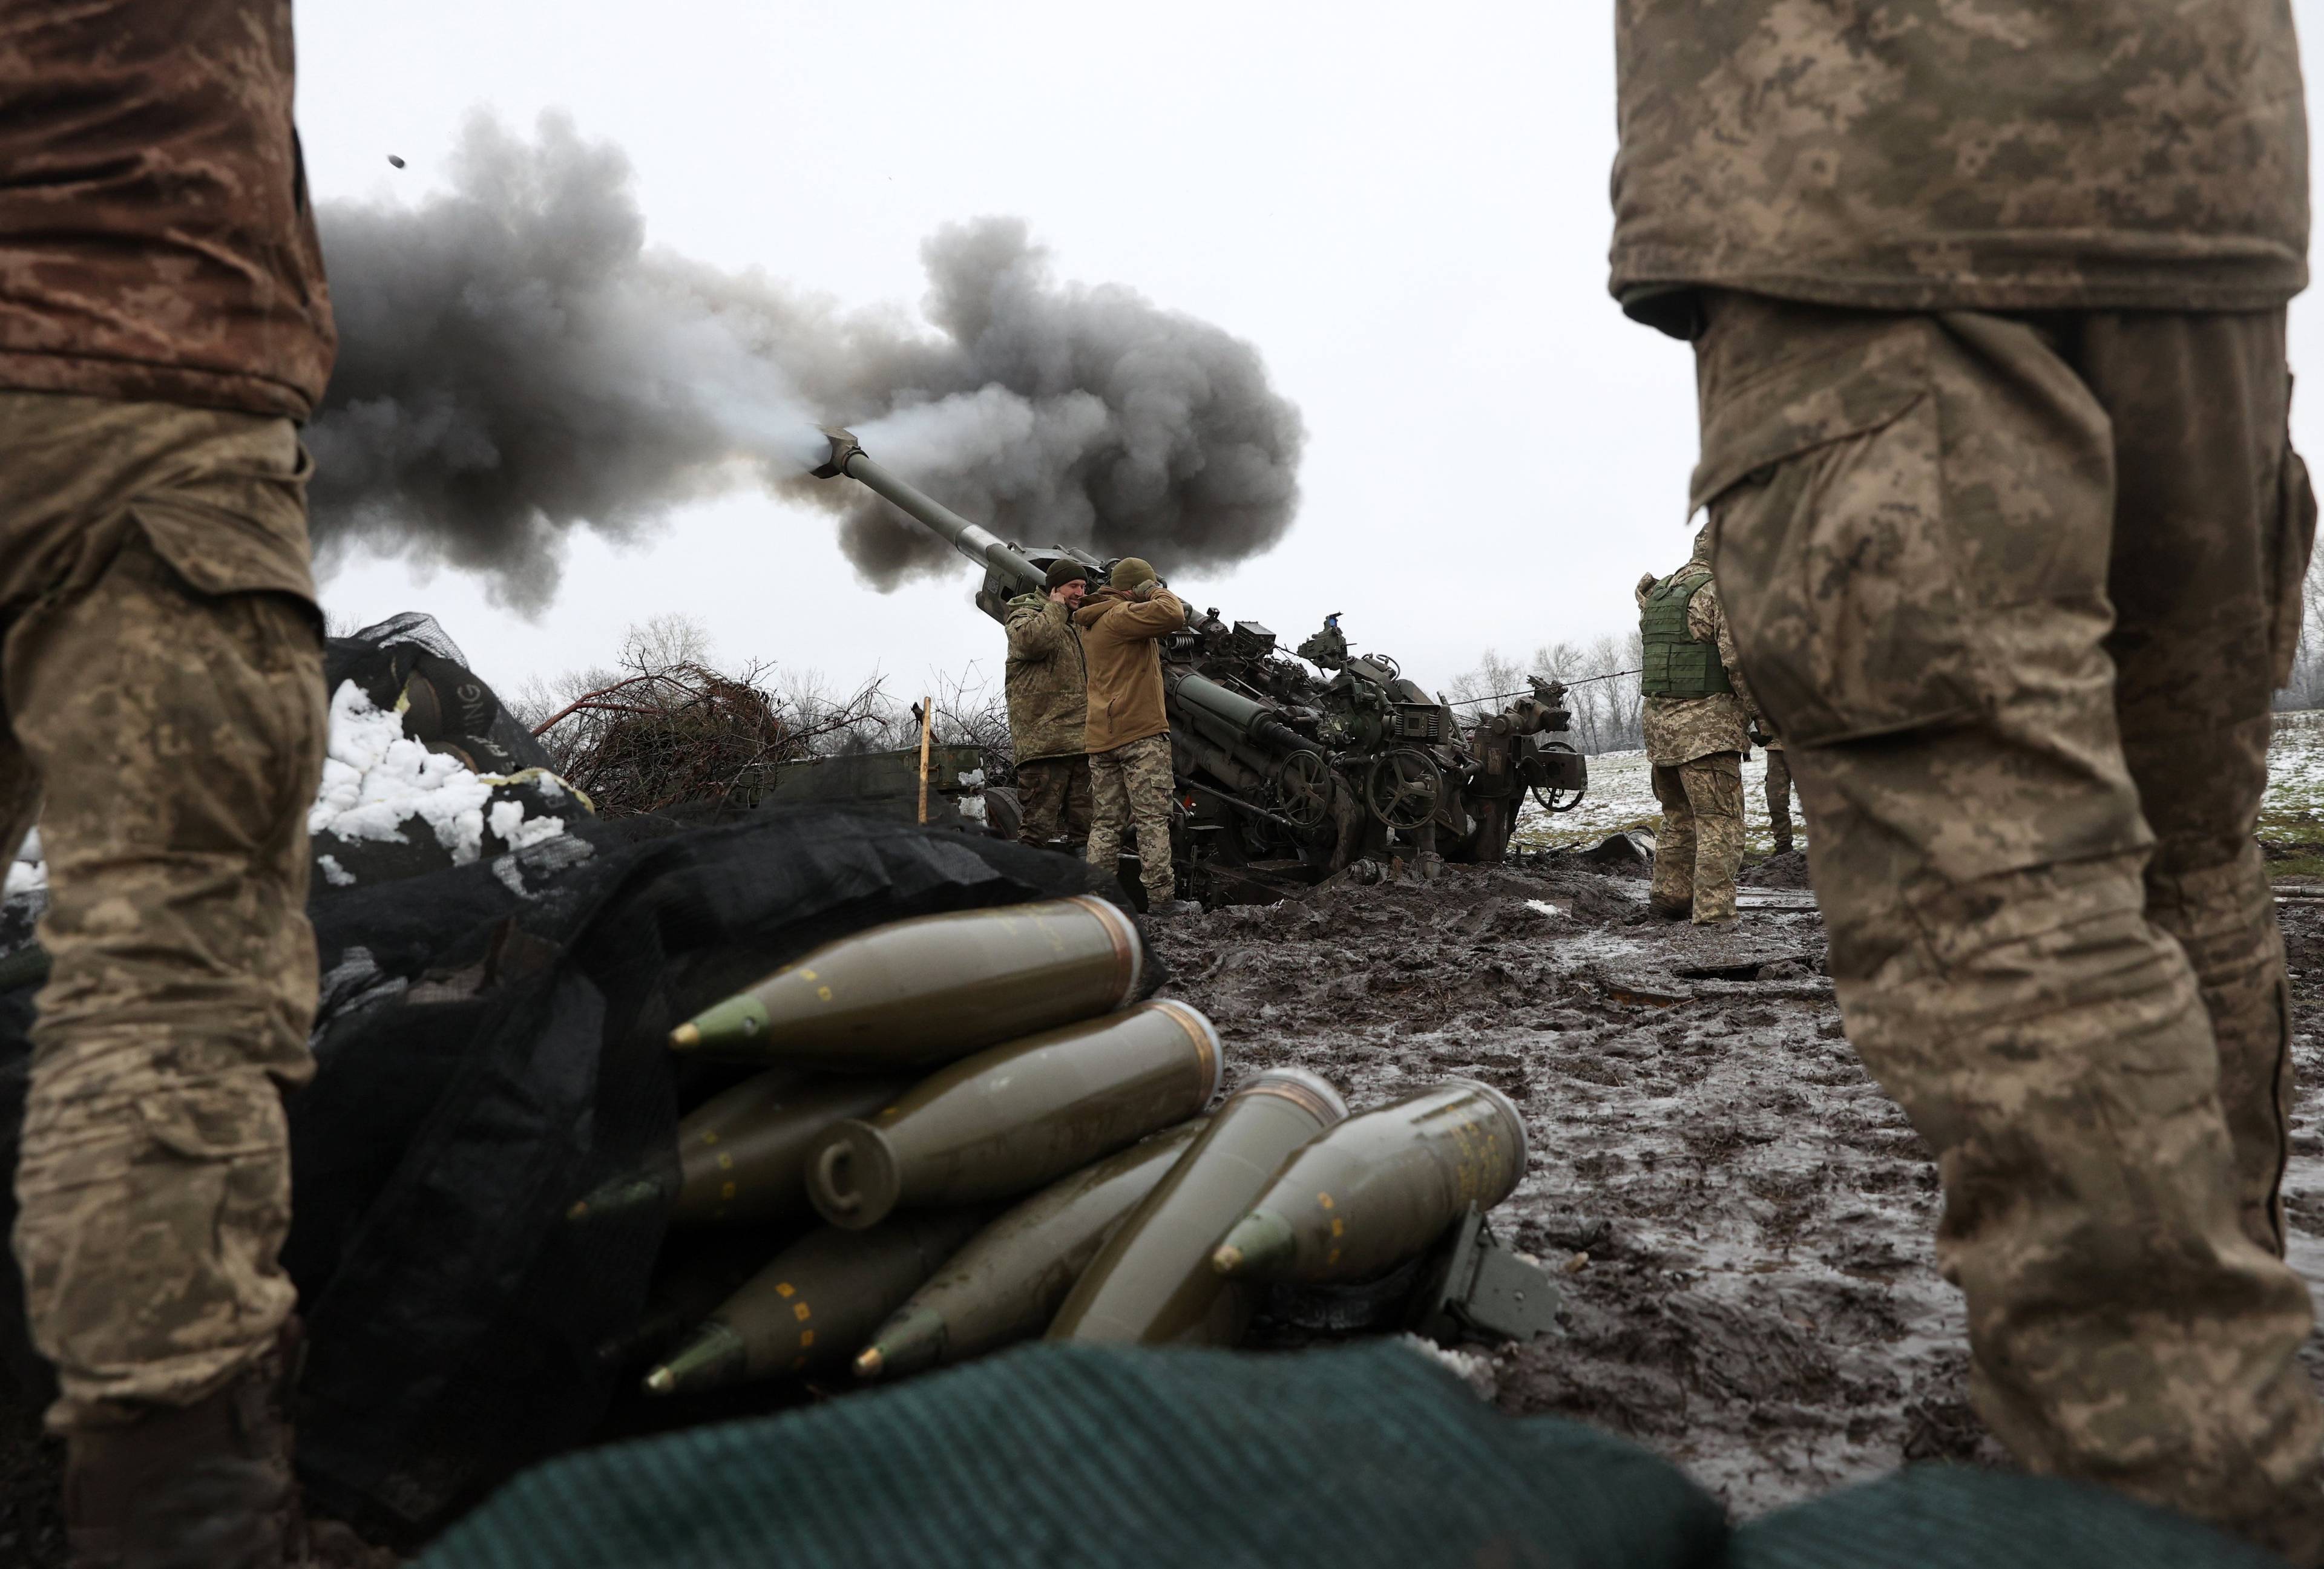 Ukrainian artillerymen fire a M777 howitzer towards Russian positions on the frontline of eastern Ukraine, on November 23, 2022, amid the Russian invasion of Ukraine. (Photo by Anatolii Stepanov / AFP)